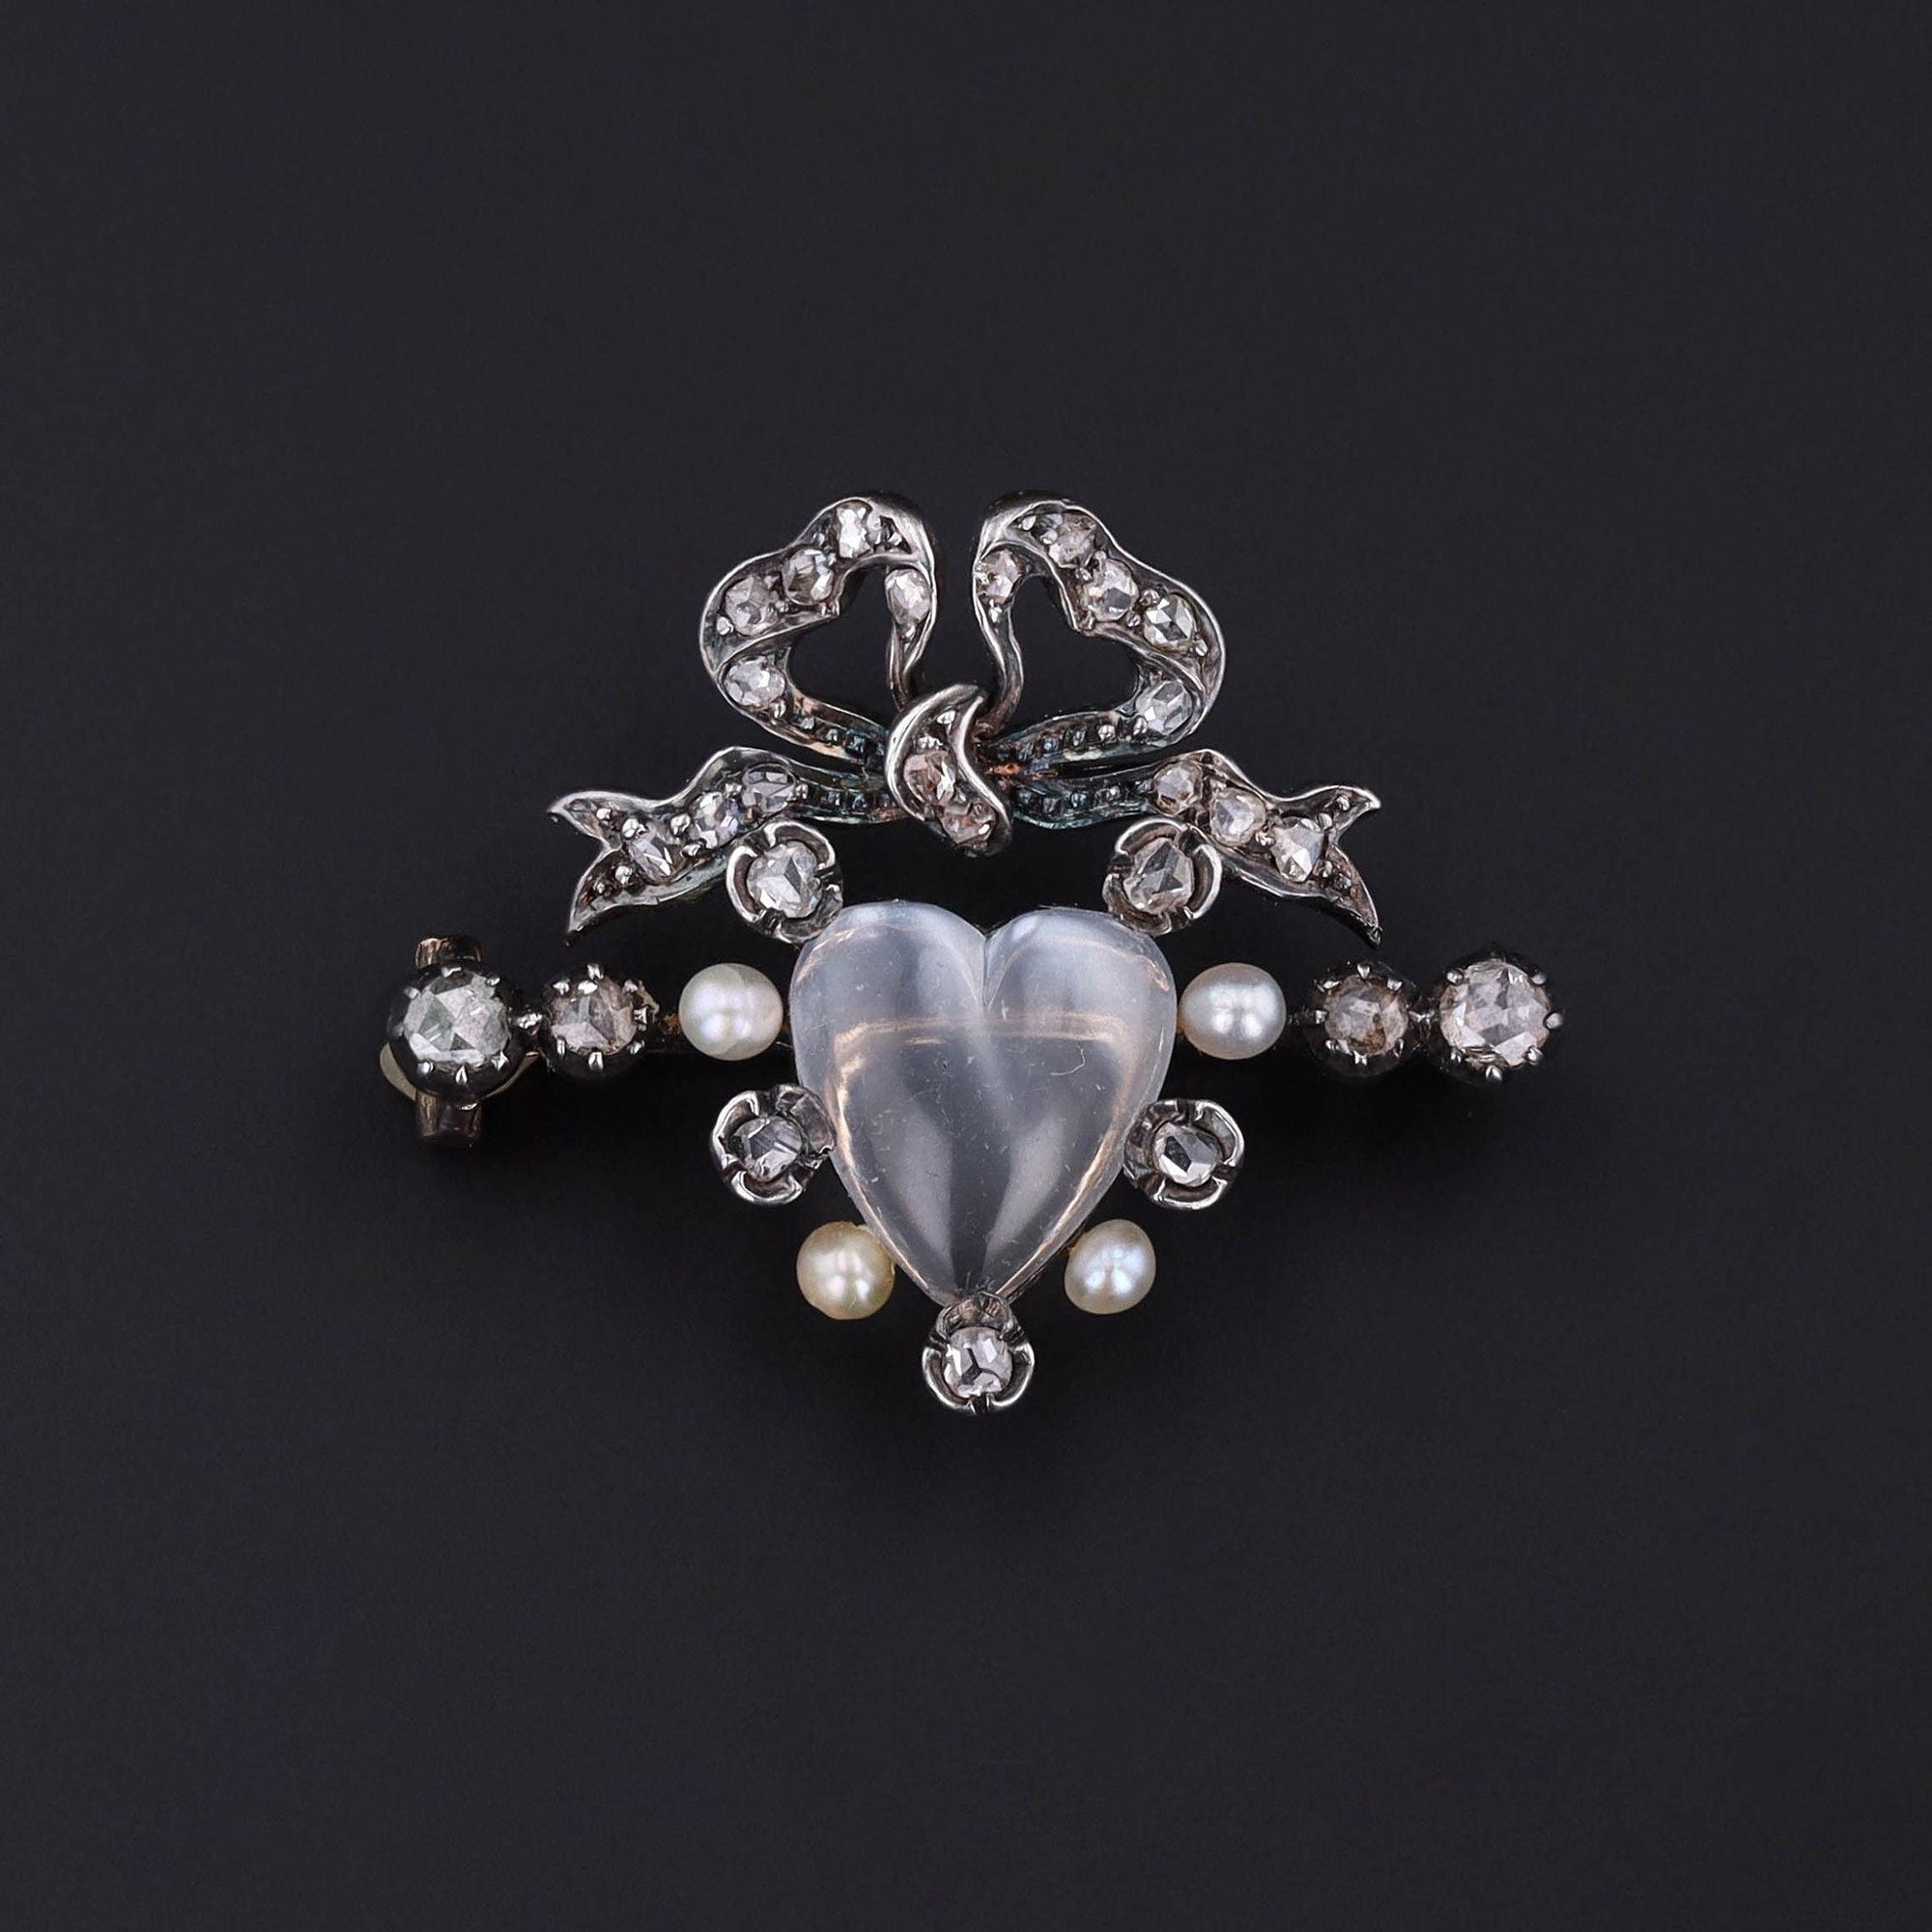 Antique Moonstone Heart Brooch | Victorian Silver Topped 14k Gold Brooch with Moonstone Diamonds and Pearls